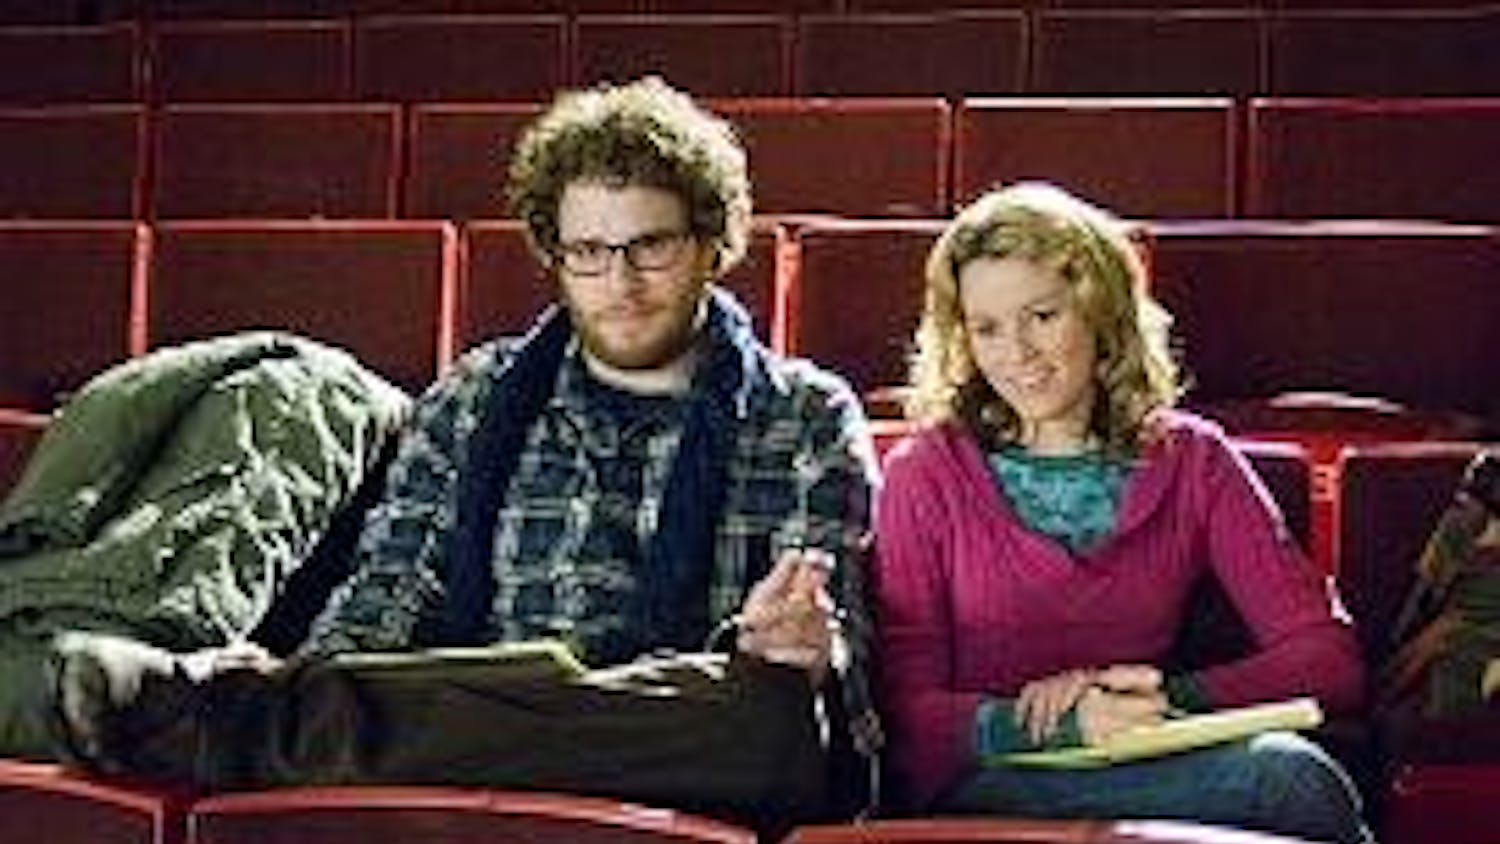 DIRTY SEXY MONEY - Seth Rogen and Elizabeth Banks show how to survive bad economic times by starring in their own porno in Kevin Smith's newest movie, "Zack and Miri Make a Porno." The film is a successful attempt by Smith to branch out beyond his home st